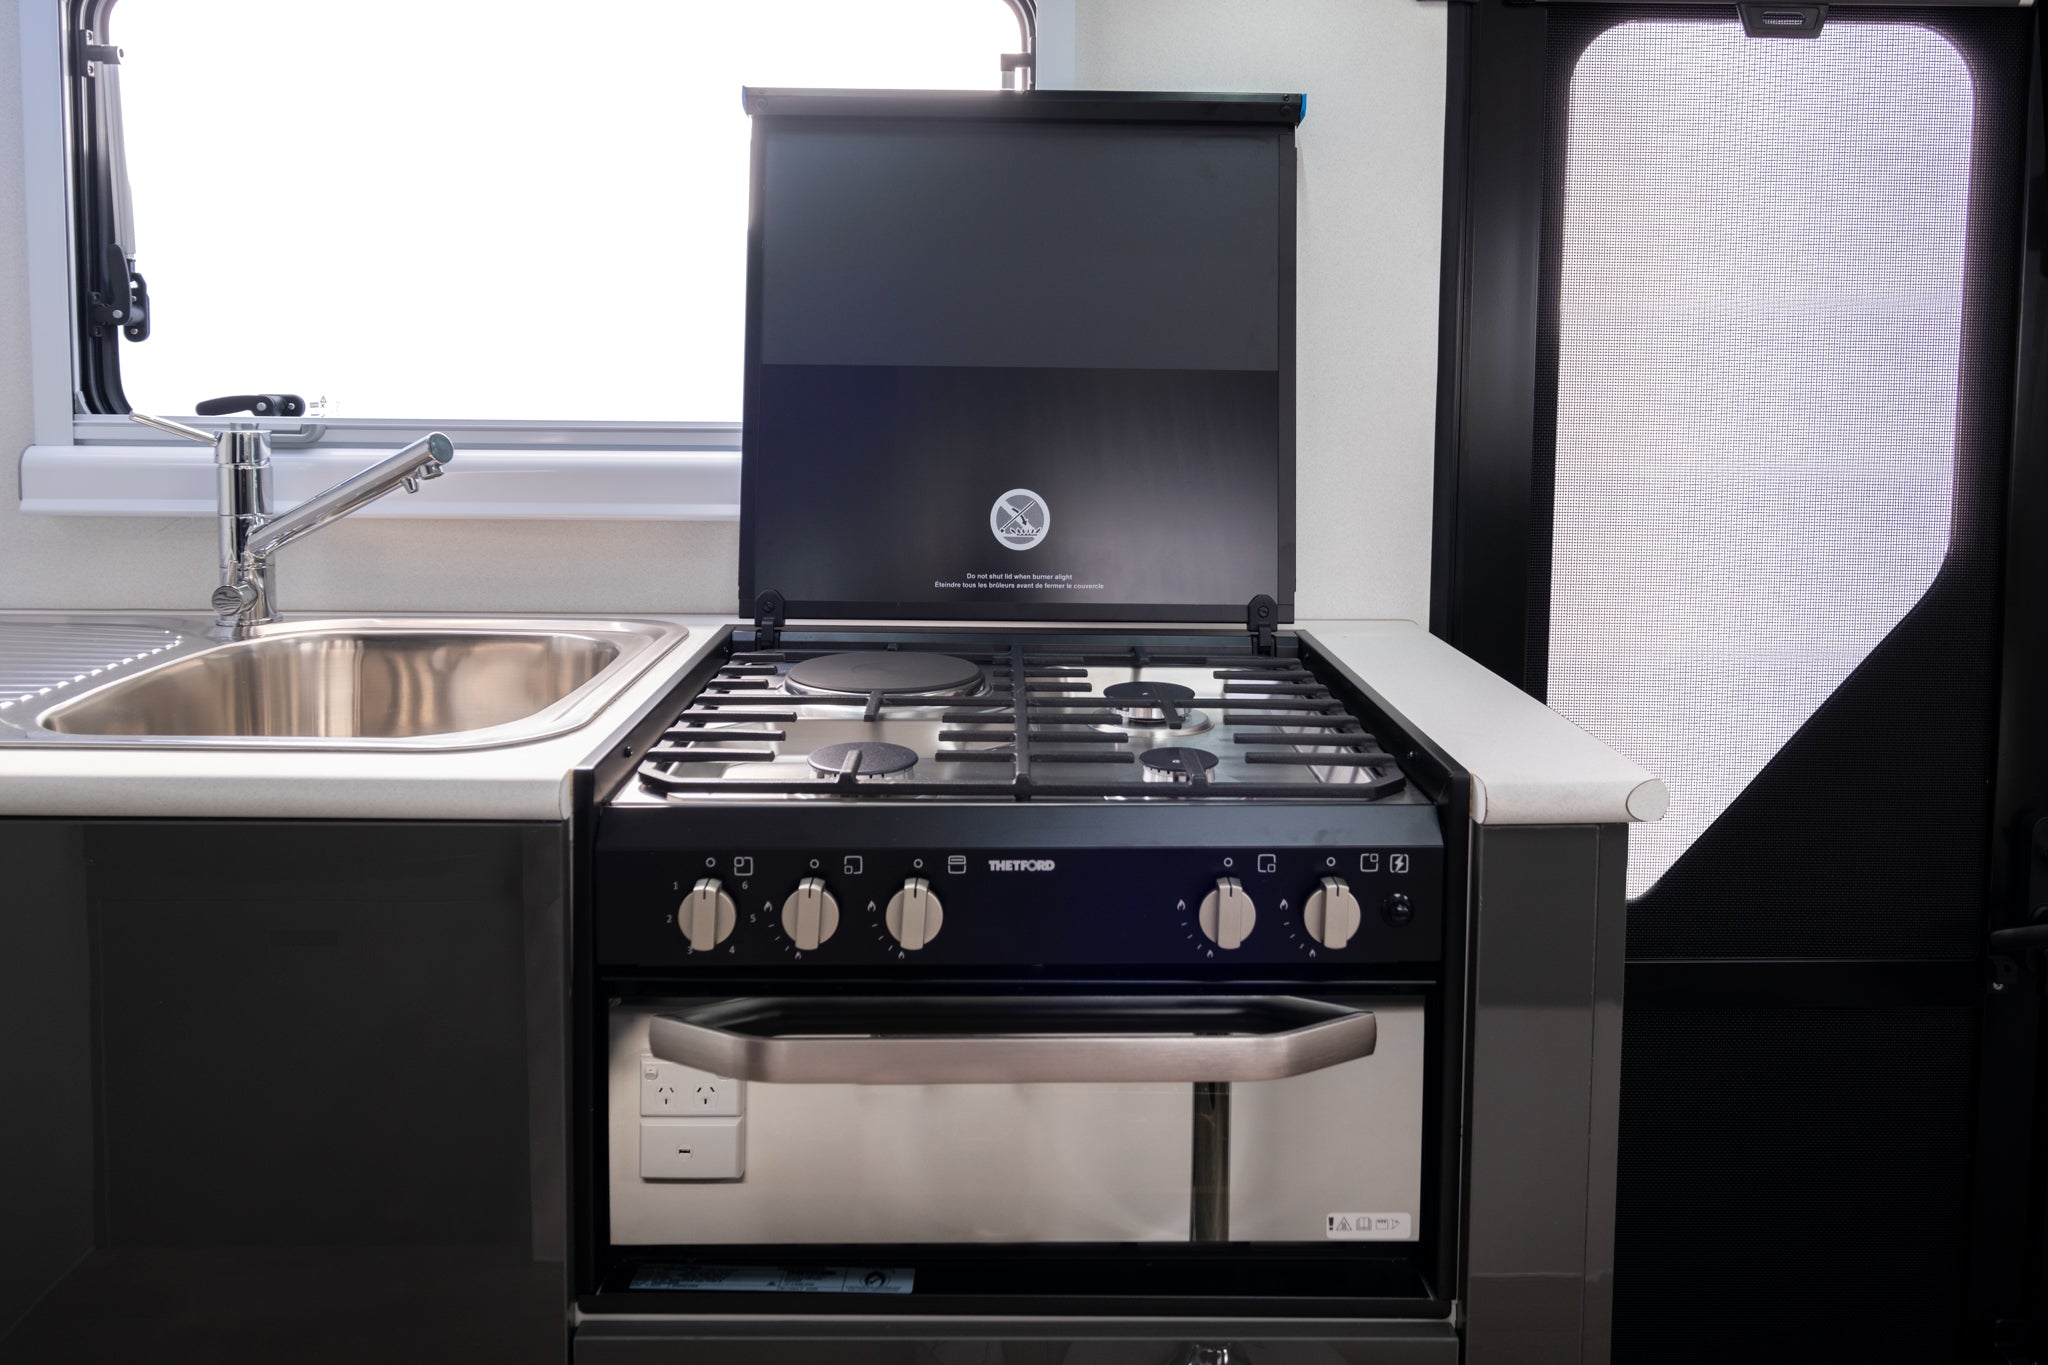 Coromal Thrill Seeker 18'6 Family stove-top burner, oven and sink